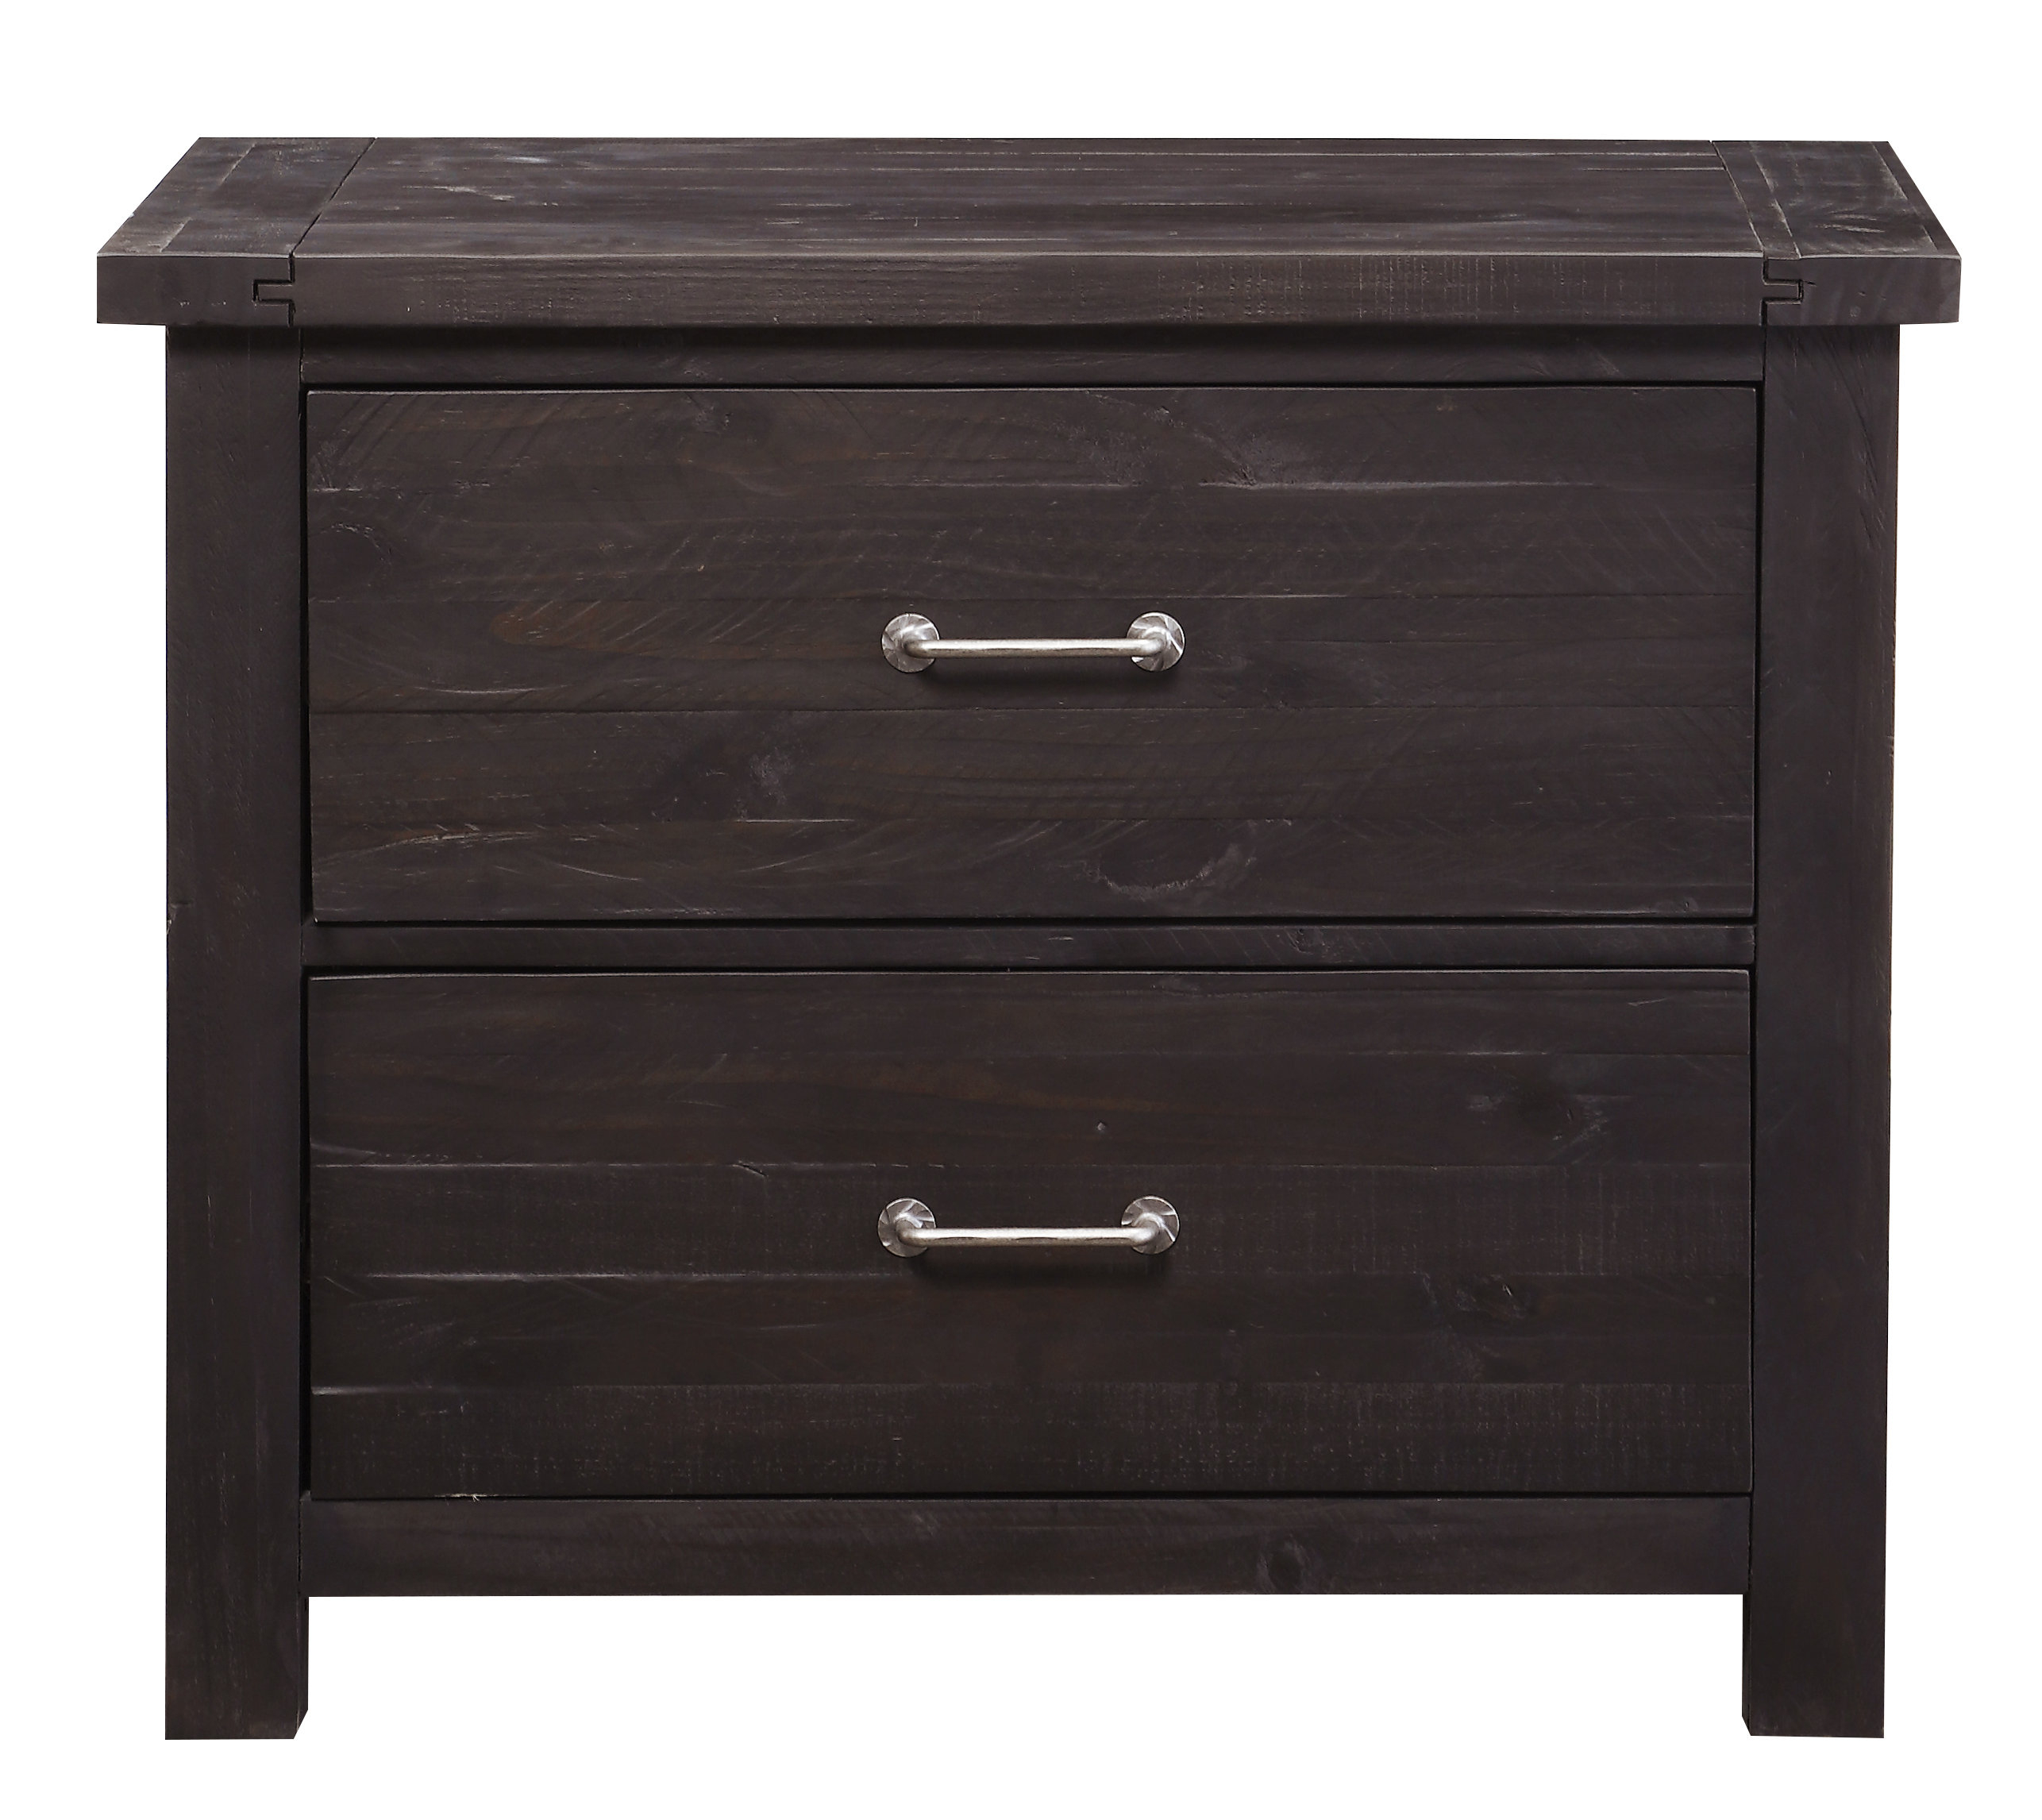 Langsa Solid Wood 2 Drawer Lateral Filing Cabinet Allmodern intended for size 2572 X 2292